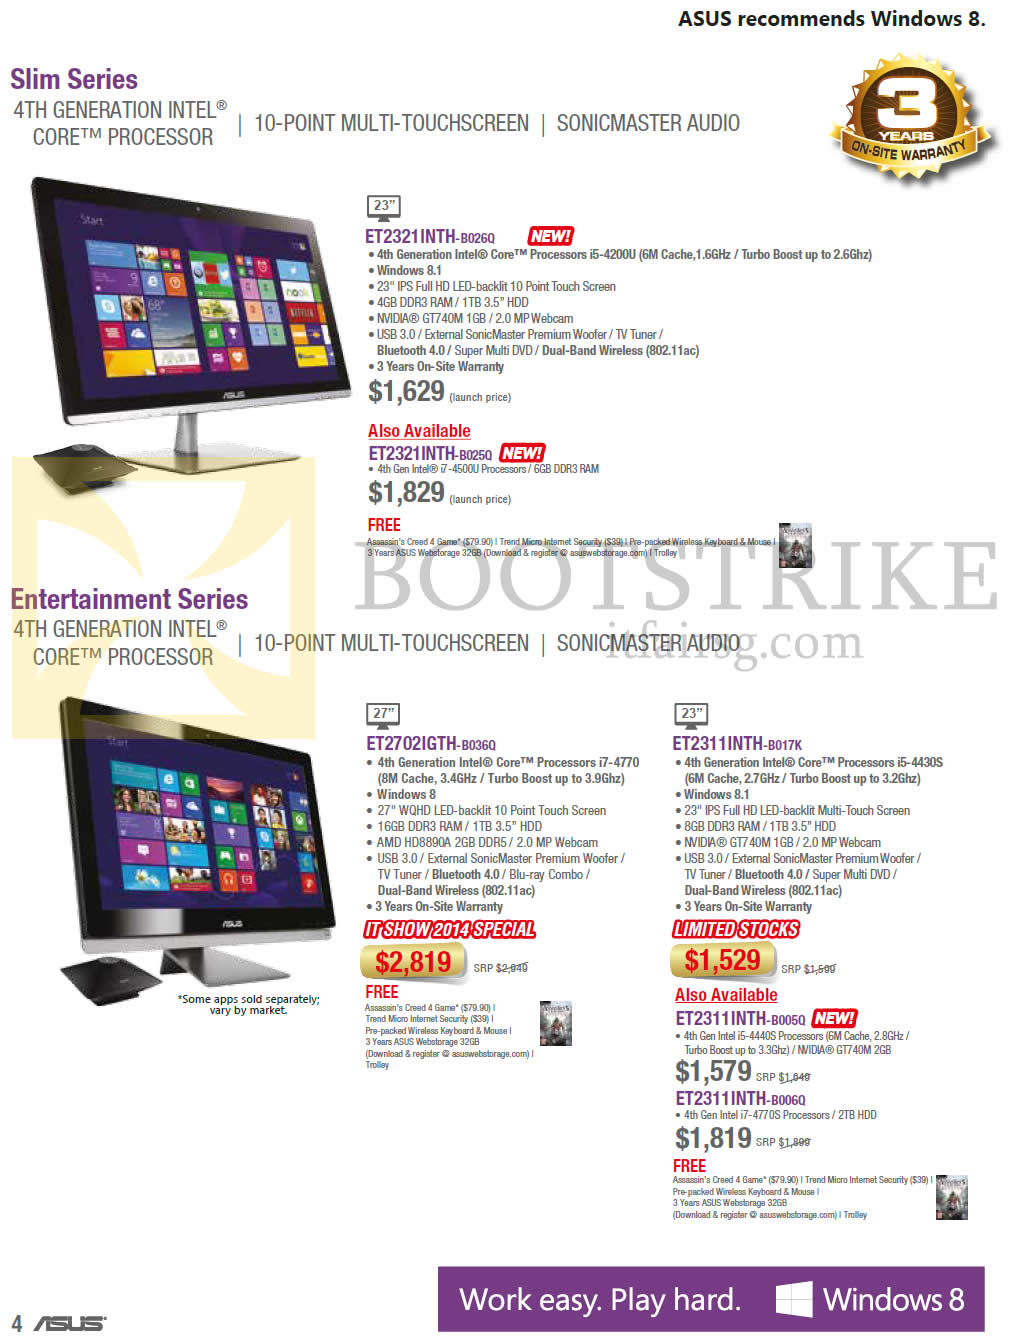 IT SHOW 2014 price list image brochure of ASUS AIO Desktop PCs ET2321INTH-B026Q, ET2702IGTH-B036Q, ET2311INTH-B017K, ET2311INTH-B005Q, ET2311INTH-B006Q